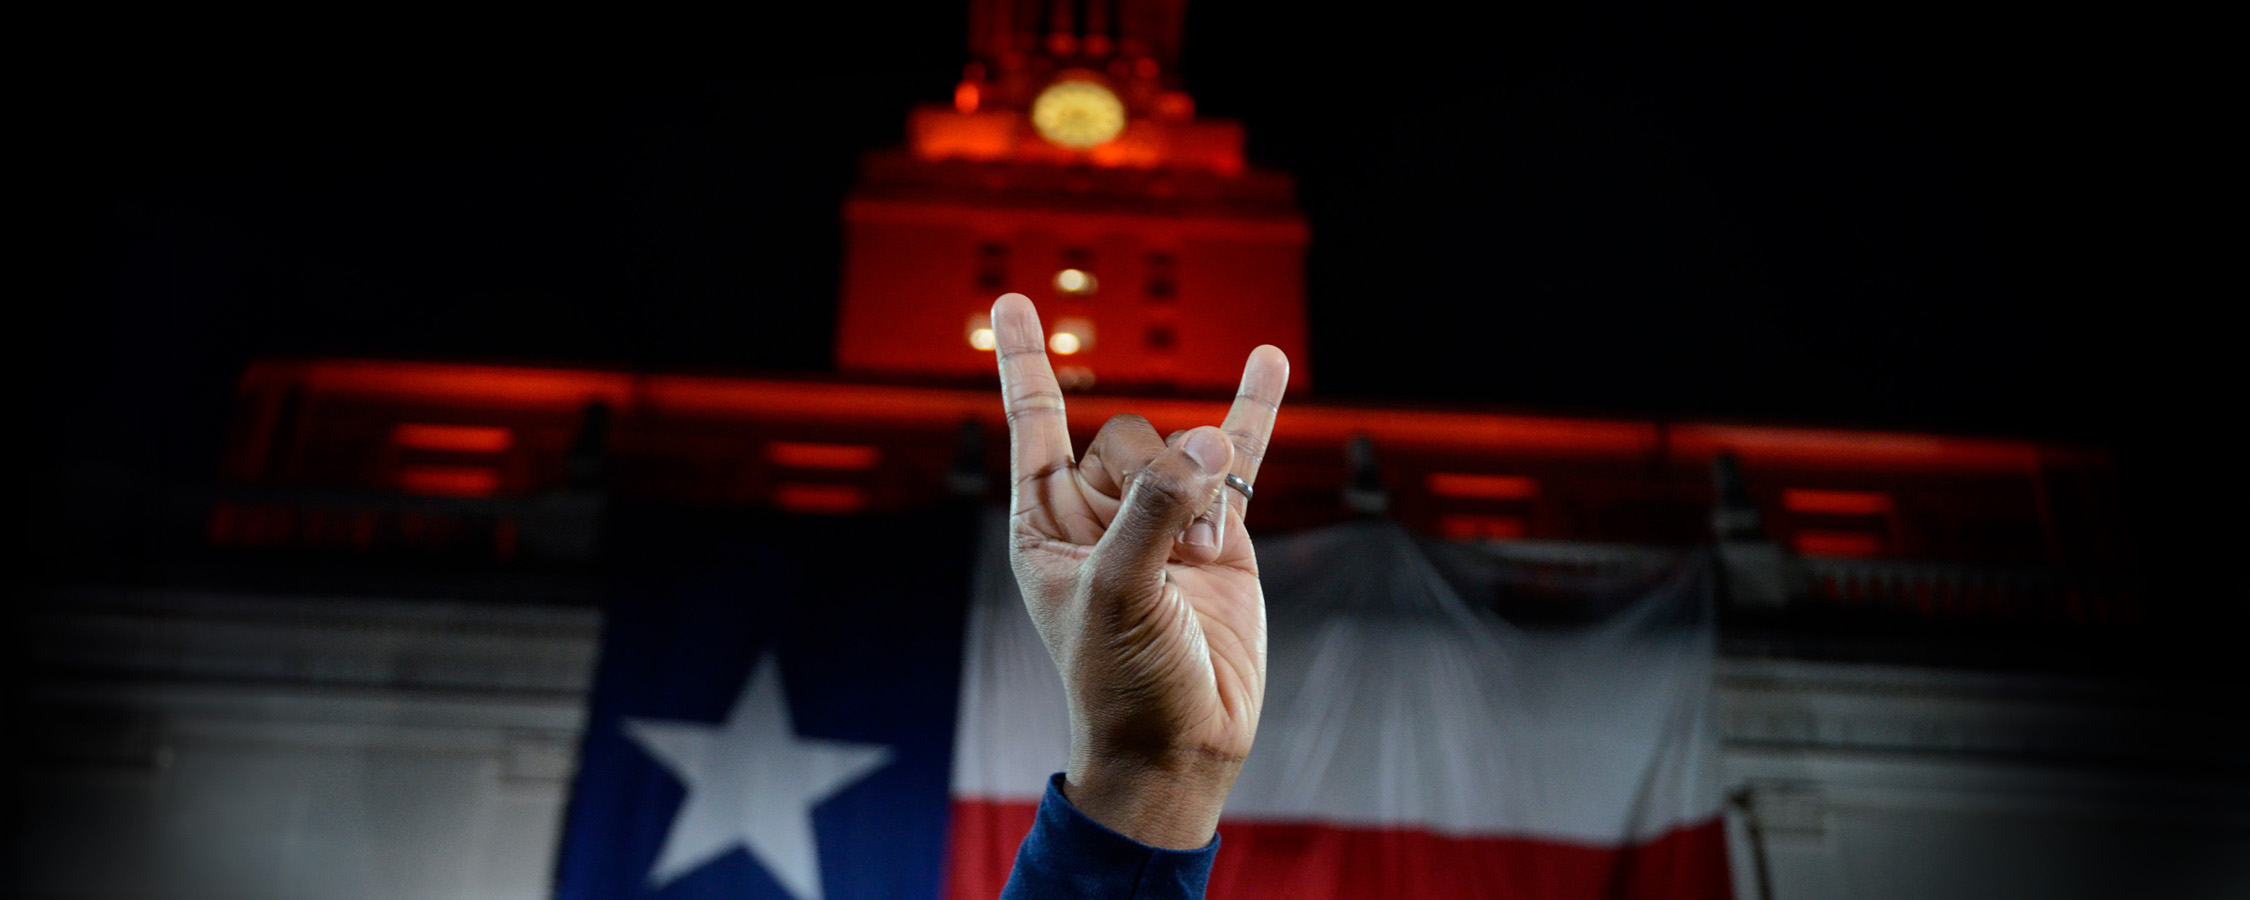 A view of a hand doing the Hook ‘Em gesture in front of the UT Tower decorated with the Texas flag.